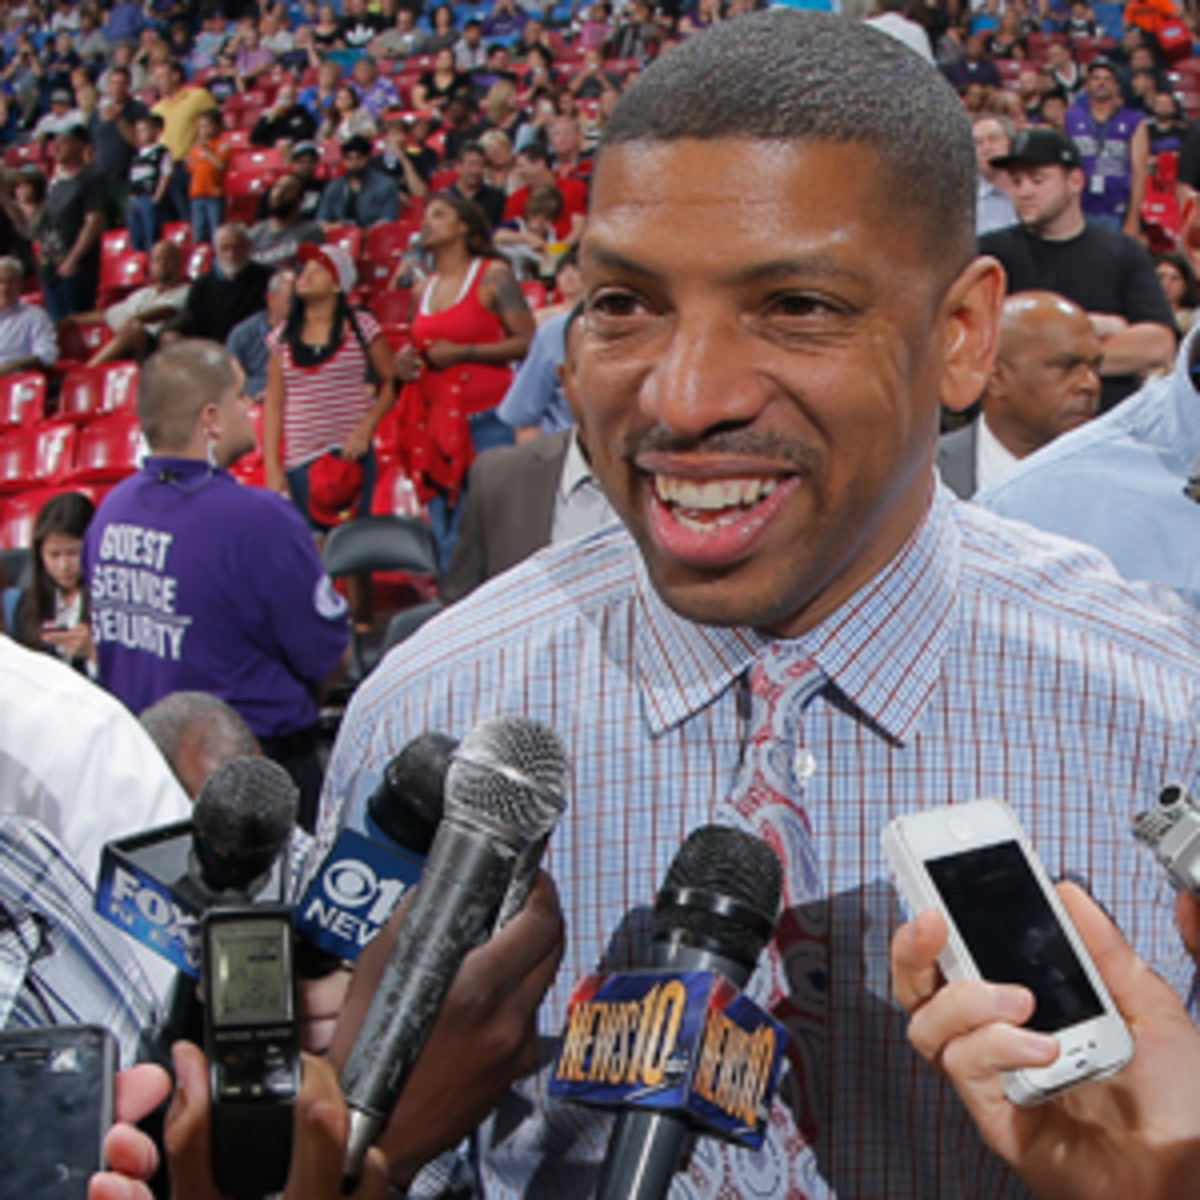 Sacramento Mayor Kevin Johnson said a local group is confident of an upcoming bid to keep the Kings. (Rocky Widner/NBAE via Getty Images)